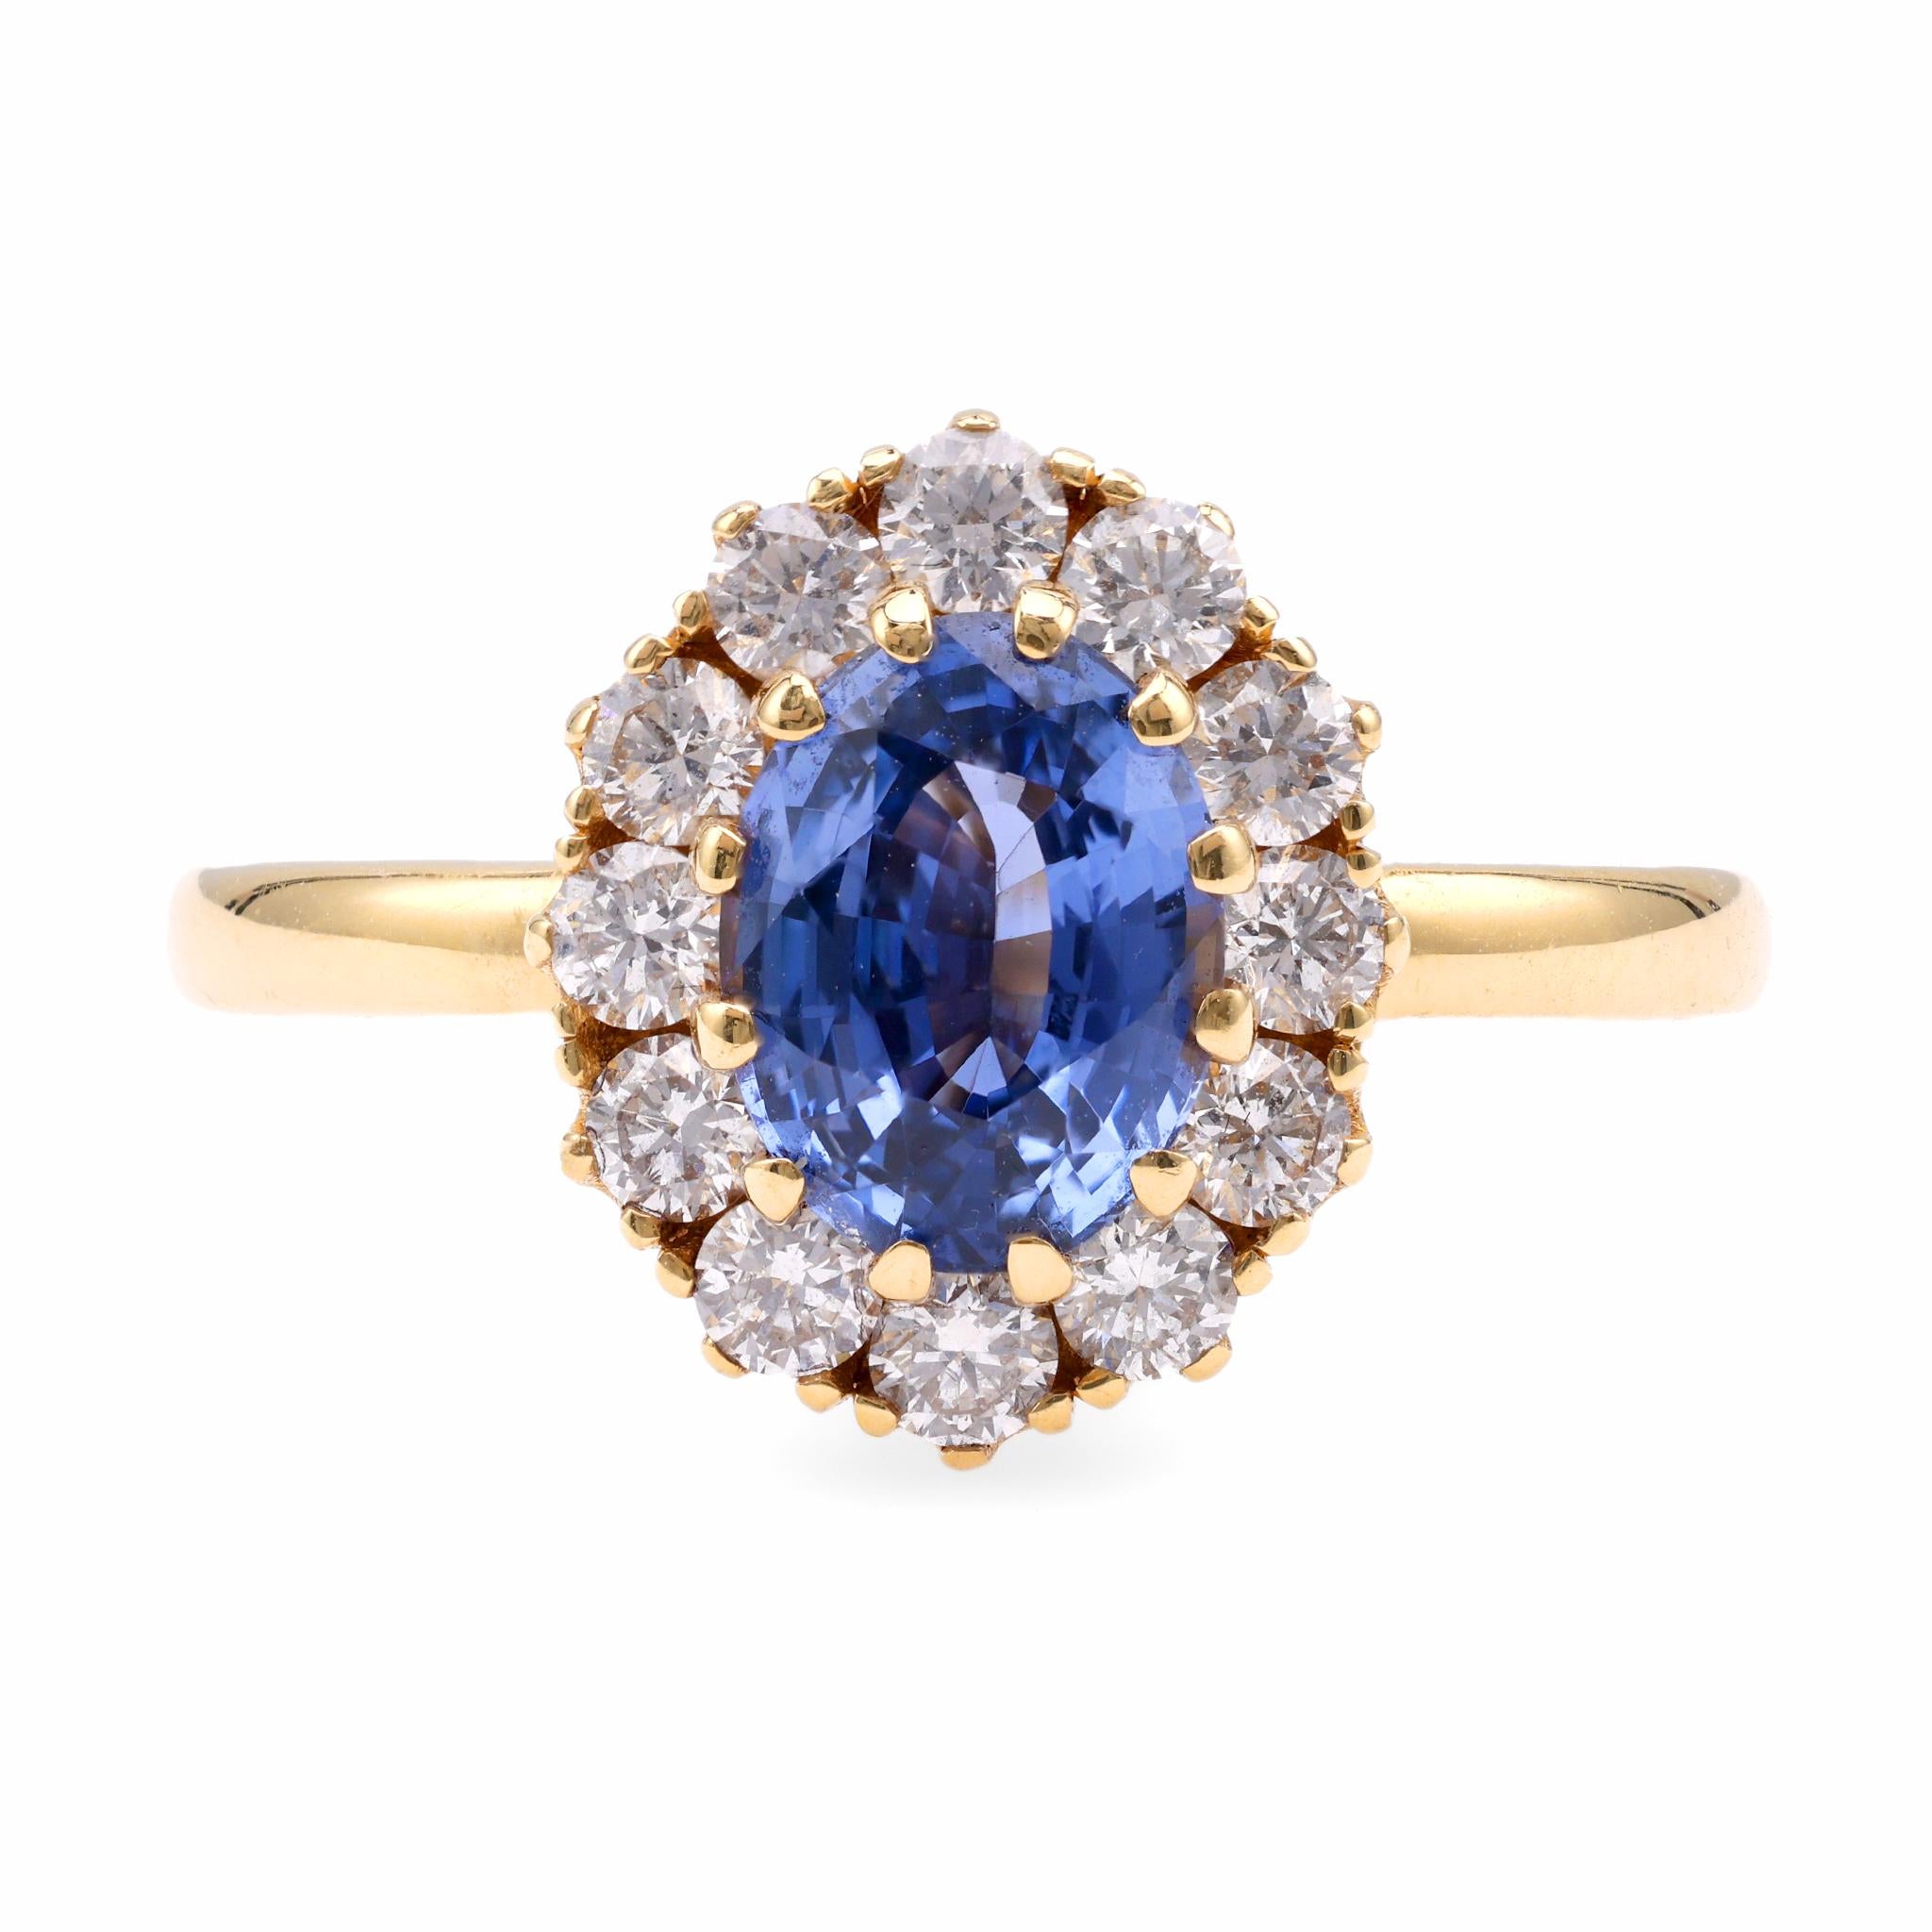 Vintage Inspired Sapphire Diamond 18K Yellow Gold Cluster Ring  Jack Weir & Sons   